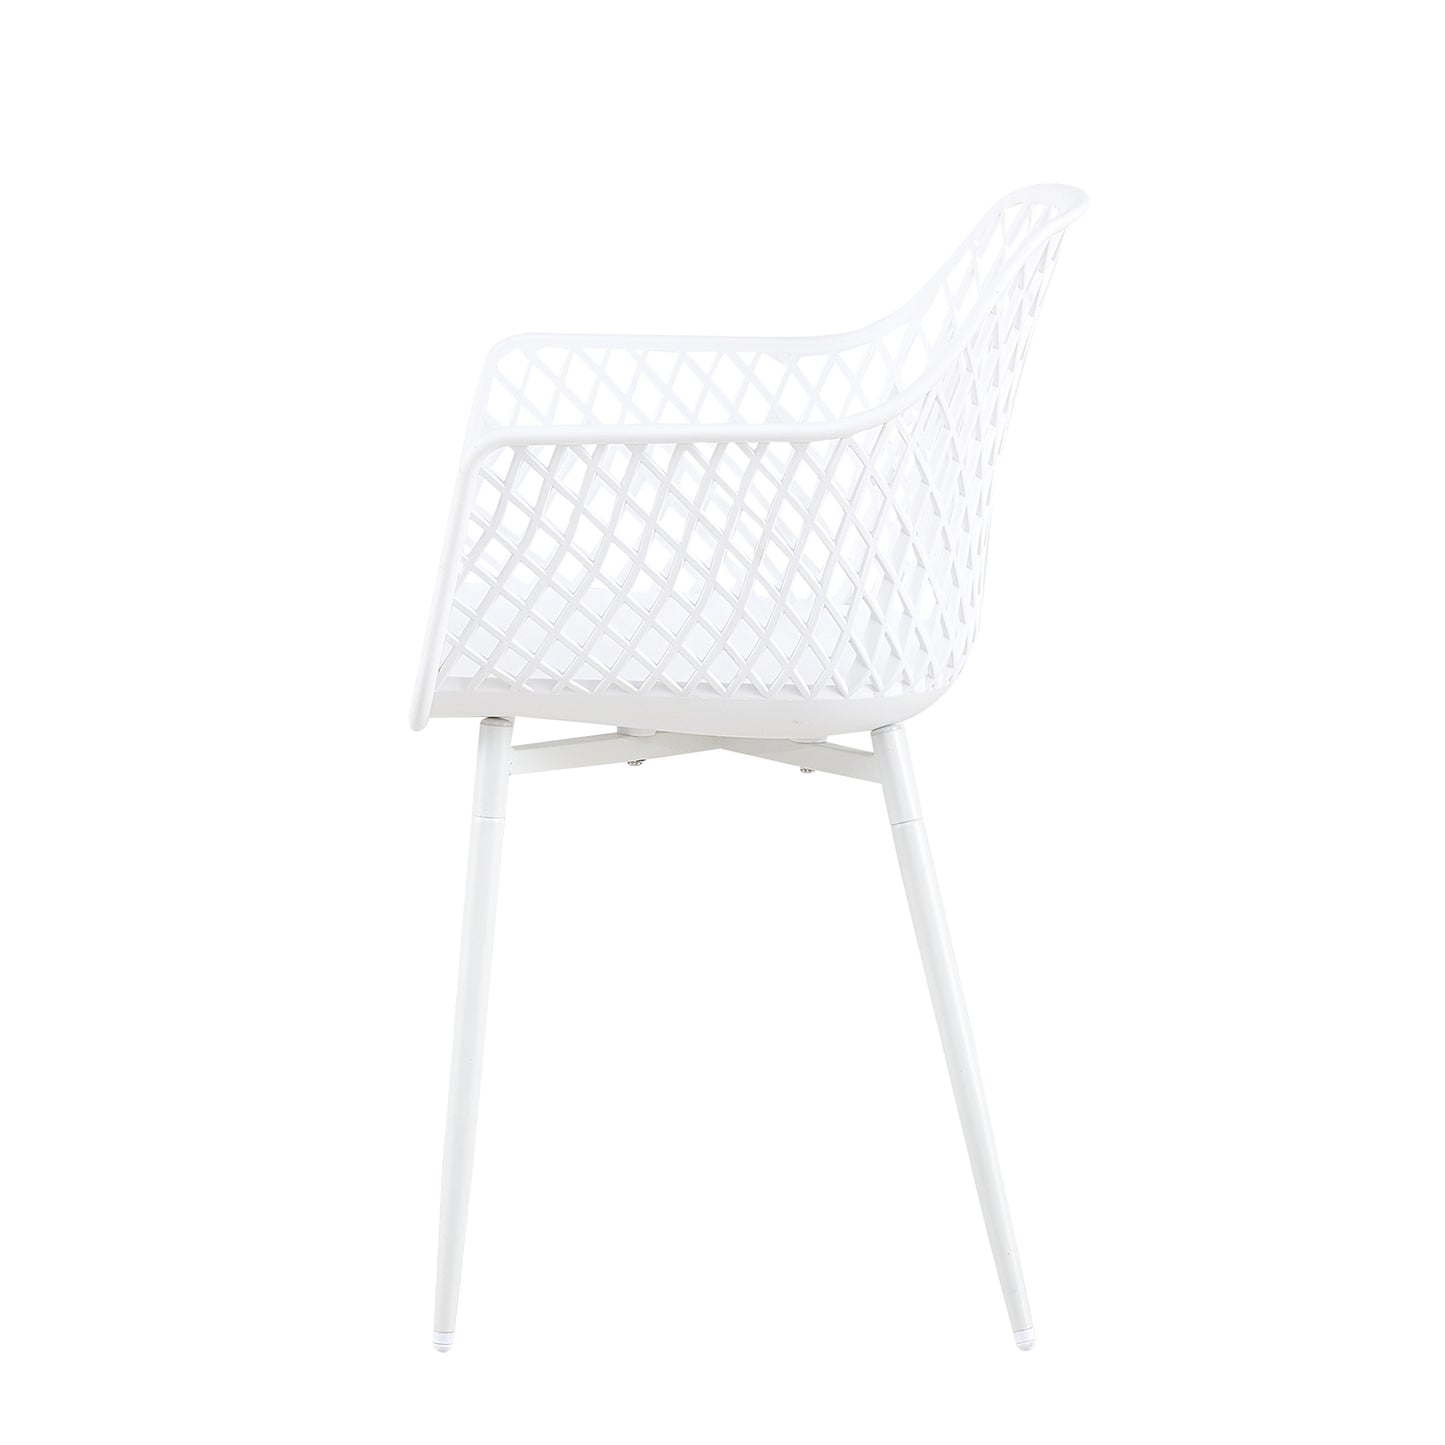 ROME Hollow Chair with Iron Legs - White